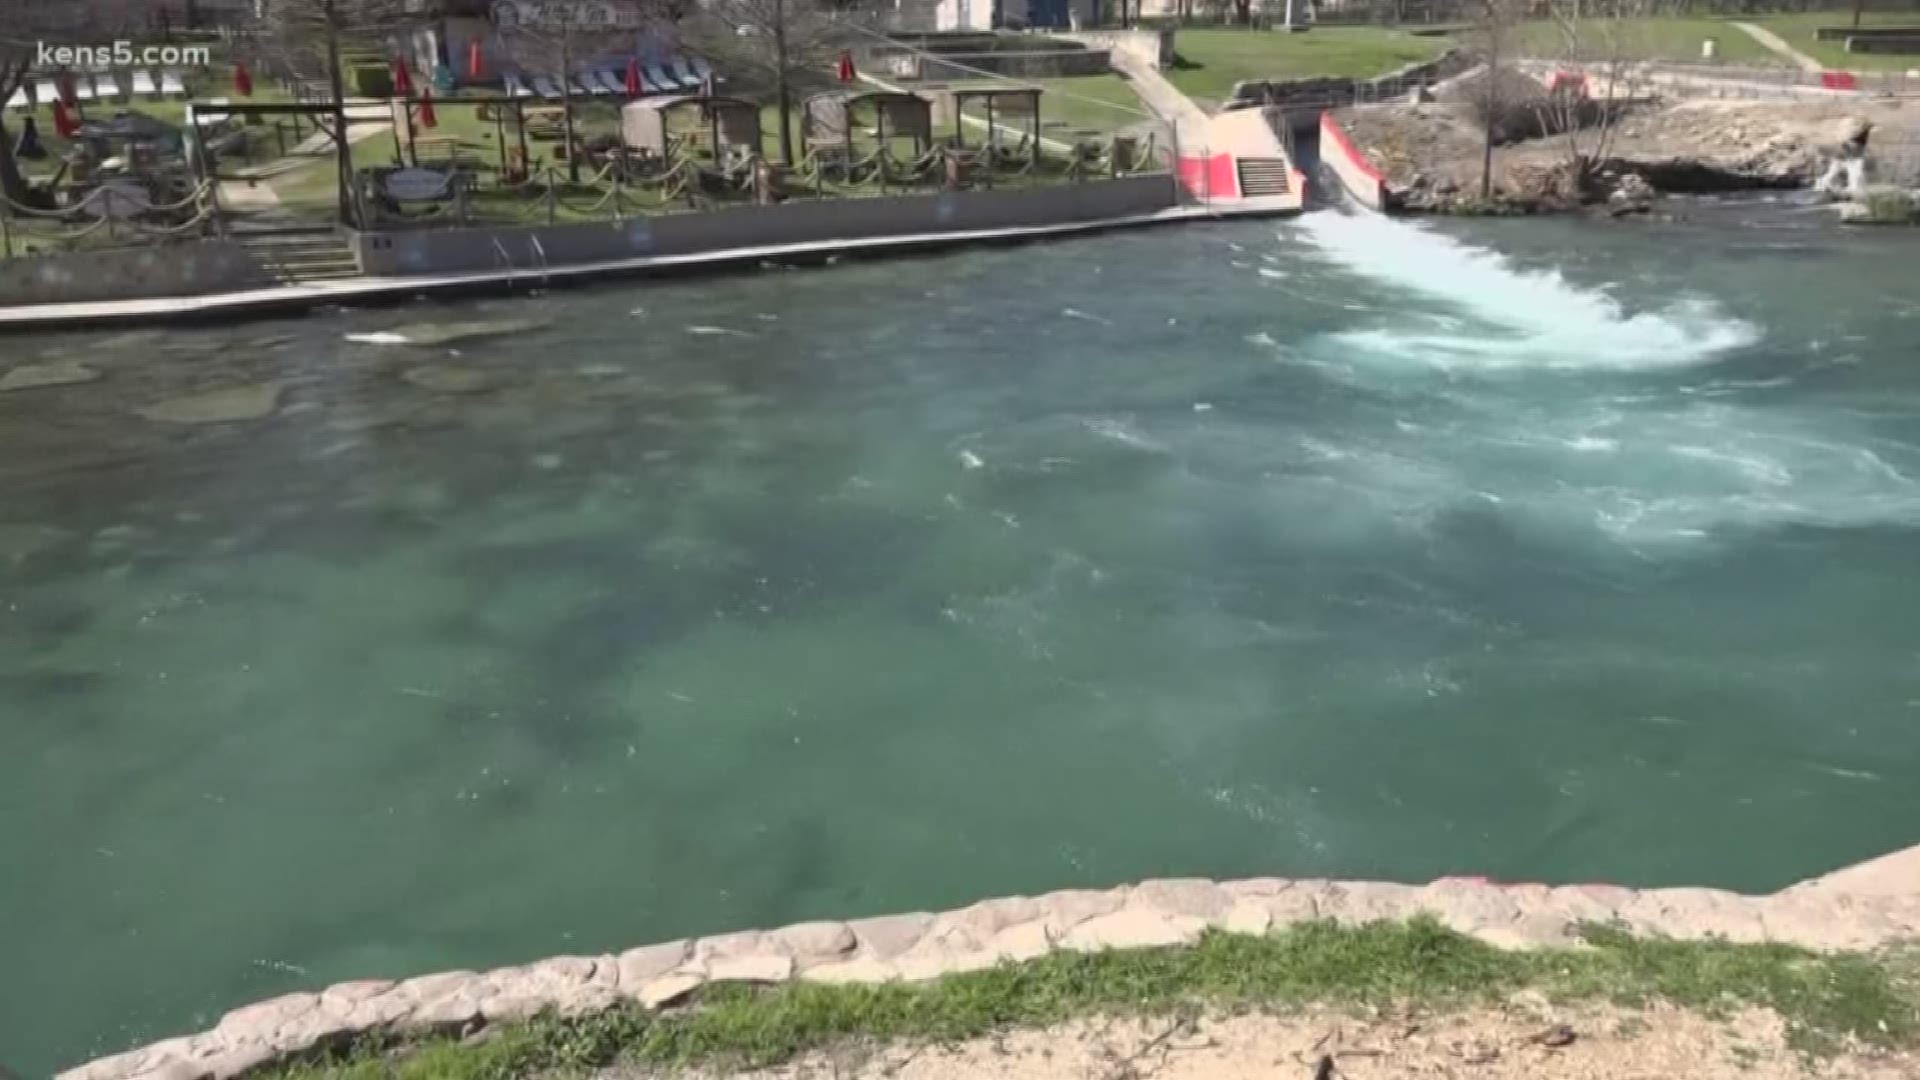 The City of New Braunfels just approved a new policy that will give visitors the option to skip the tube chute and save money.